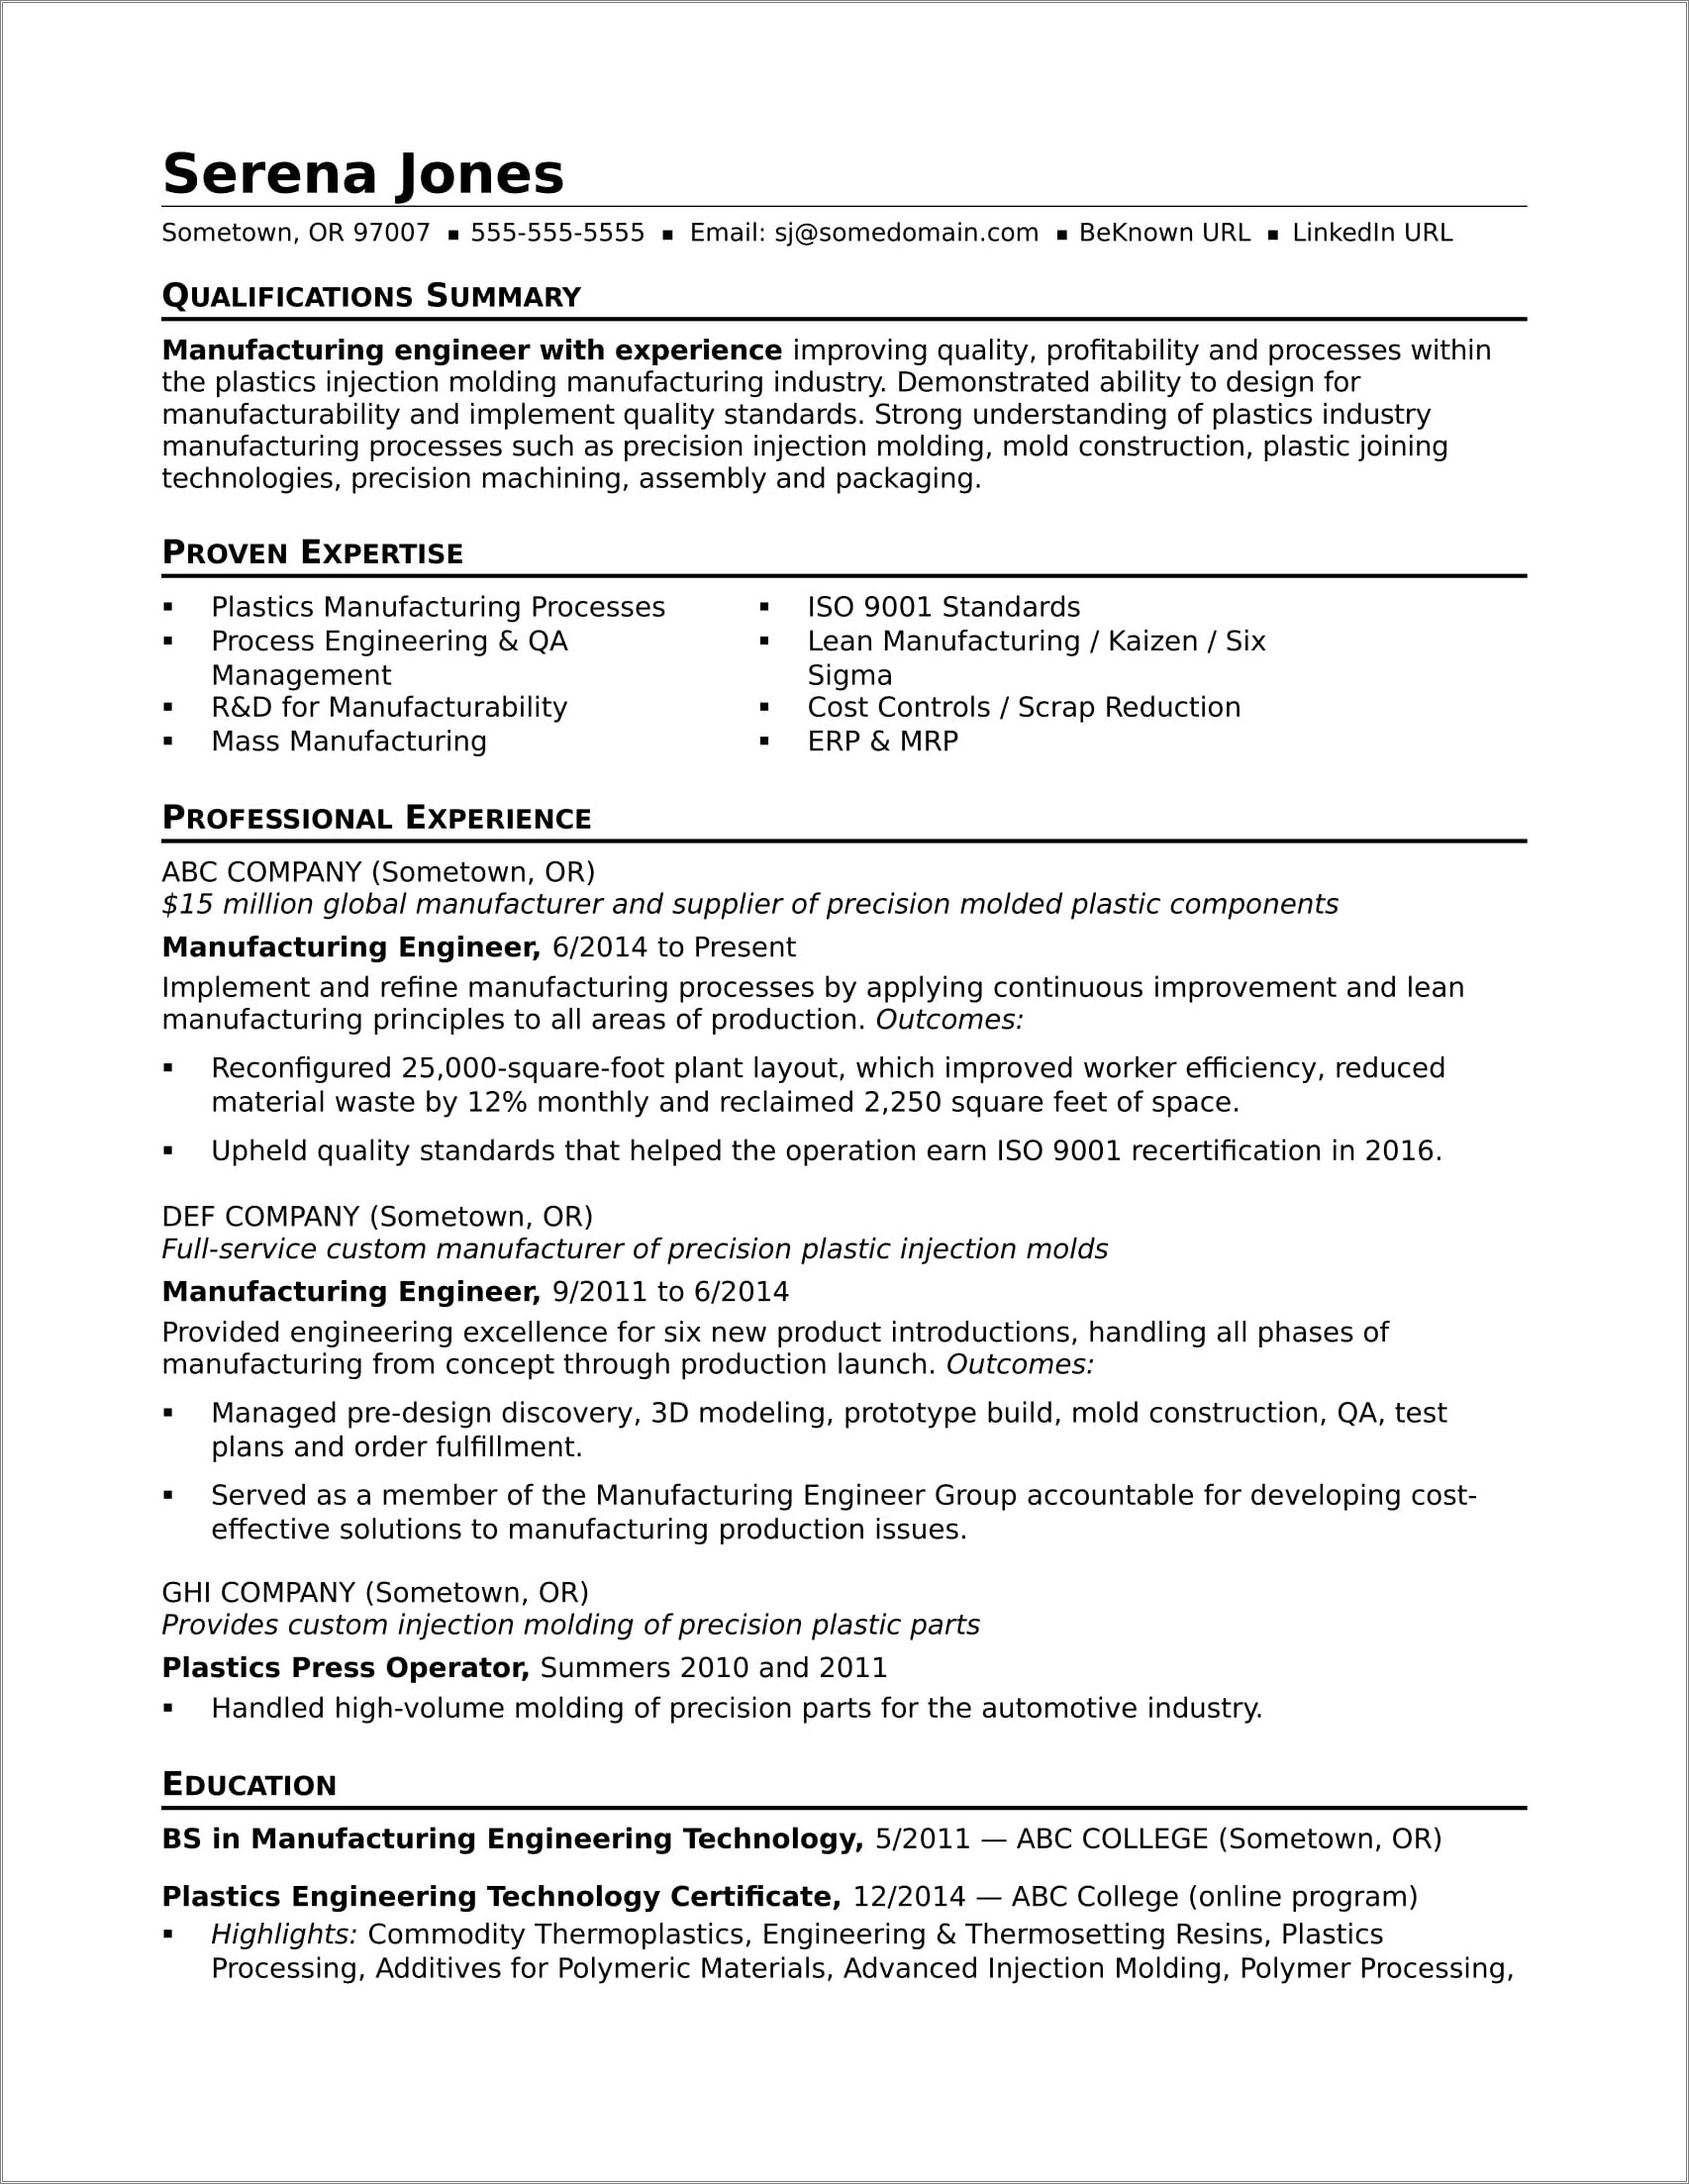 Resume Summary For Pre Med Student